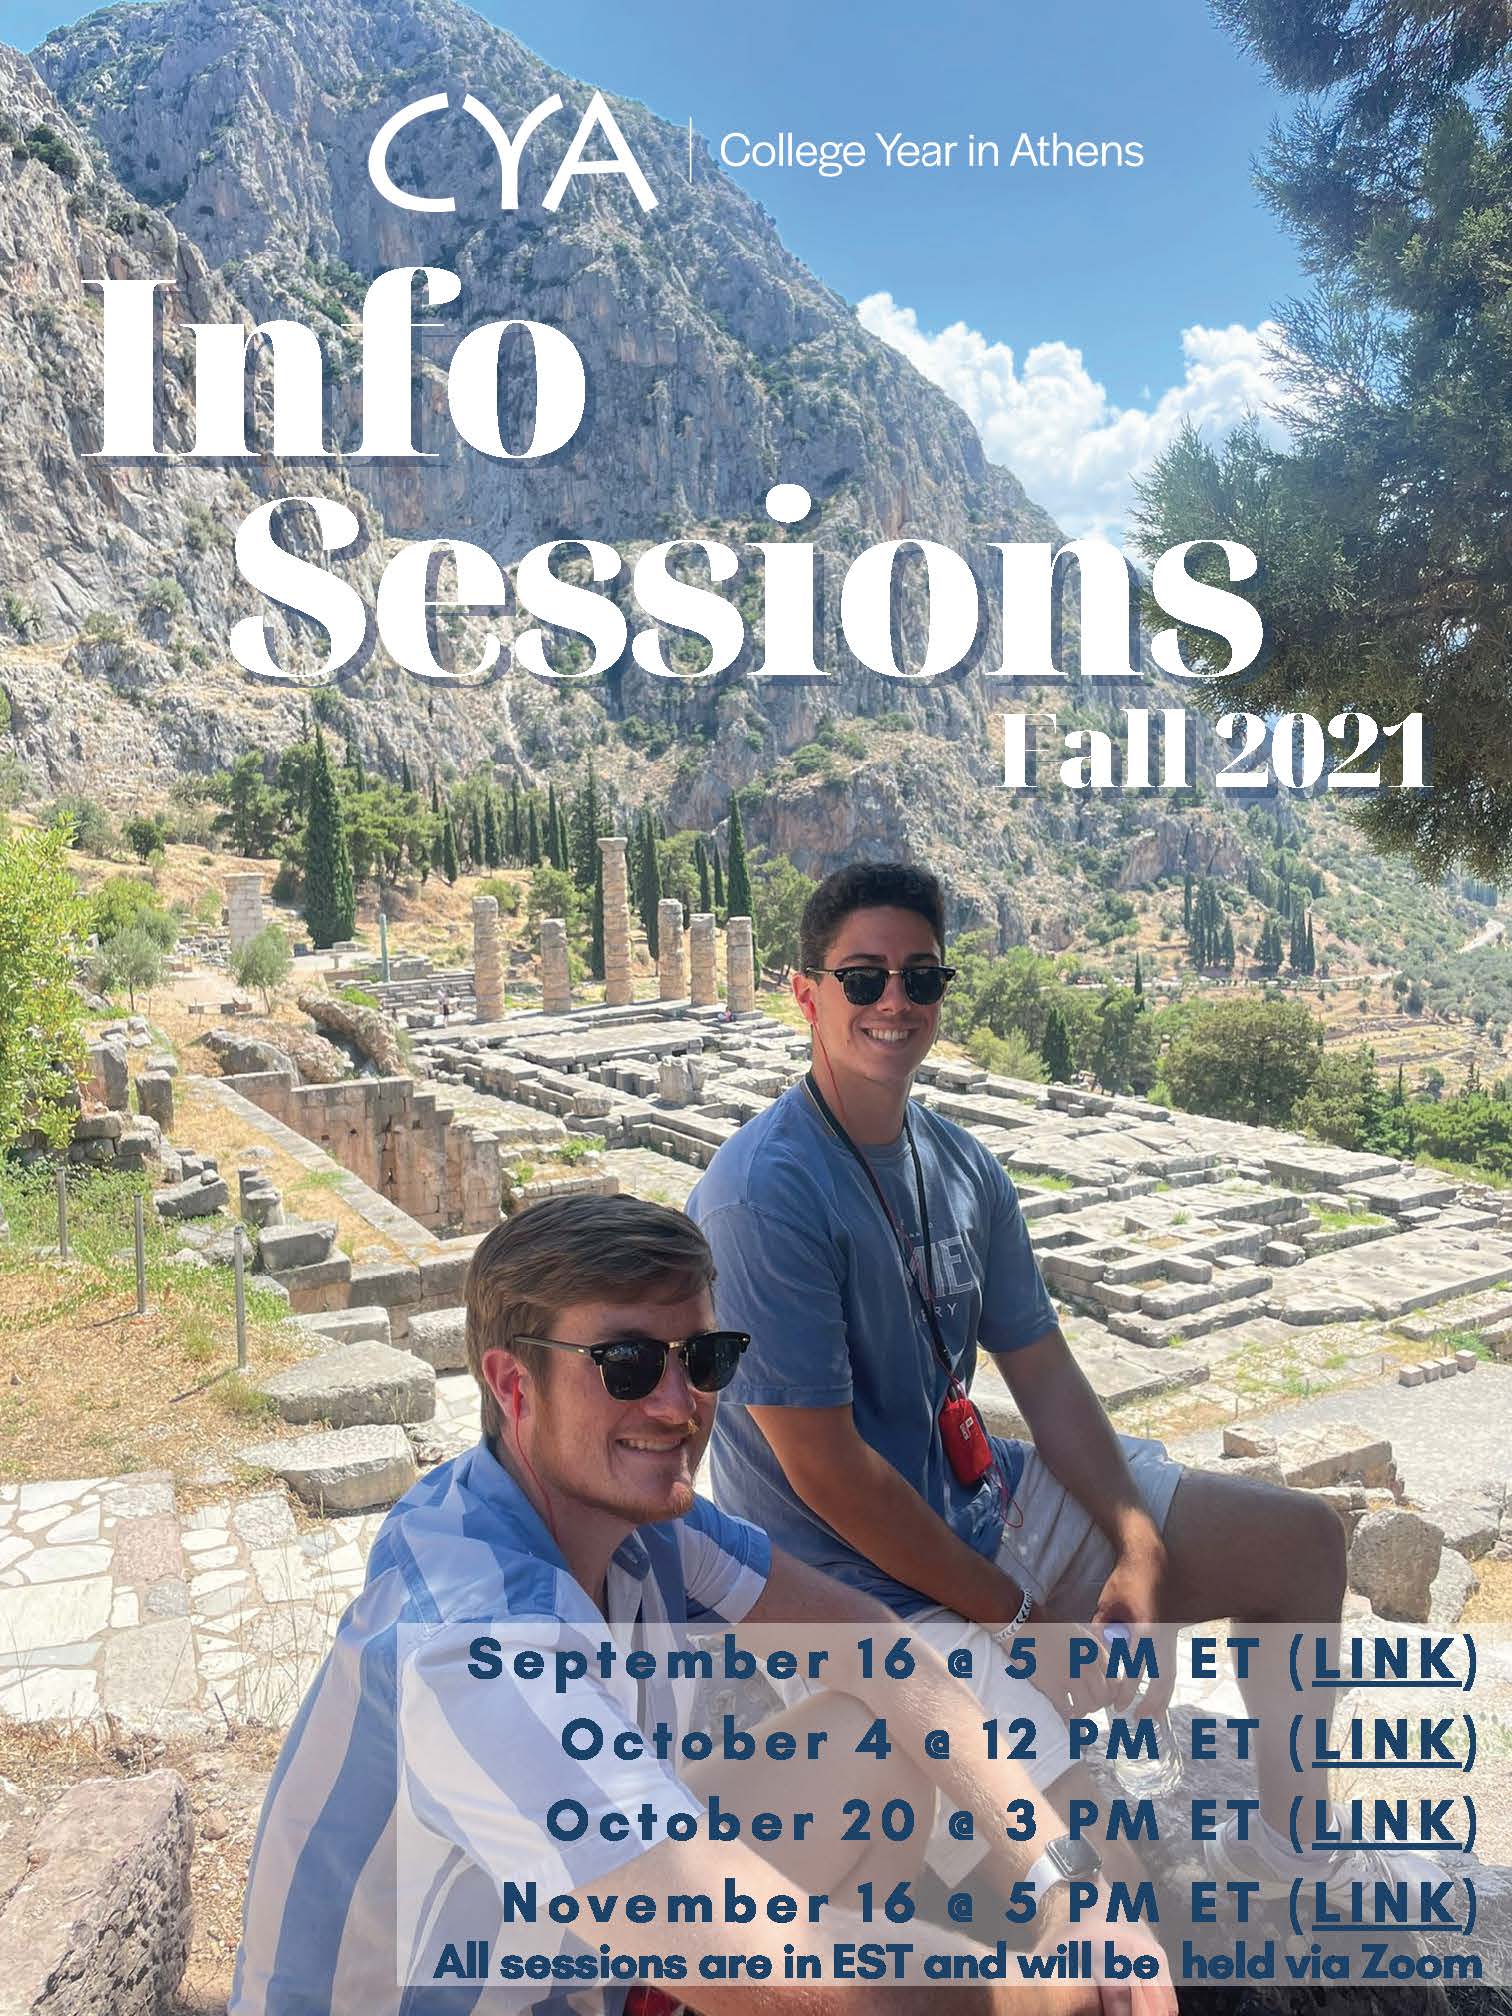 CYA College Year in Athens. Info Sessions. Fall 2021. September 16th at 5pm Eastern time. October 4th at 12pm Eastern time. October 20th at 3pm Eastern Time. November 16th at 5pm Eastern time. All sessions are in Eastern Standard Time and will be held via Zoom